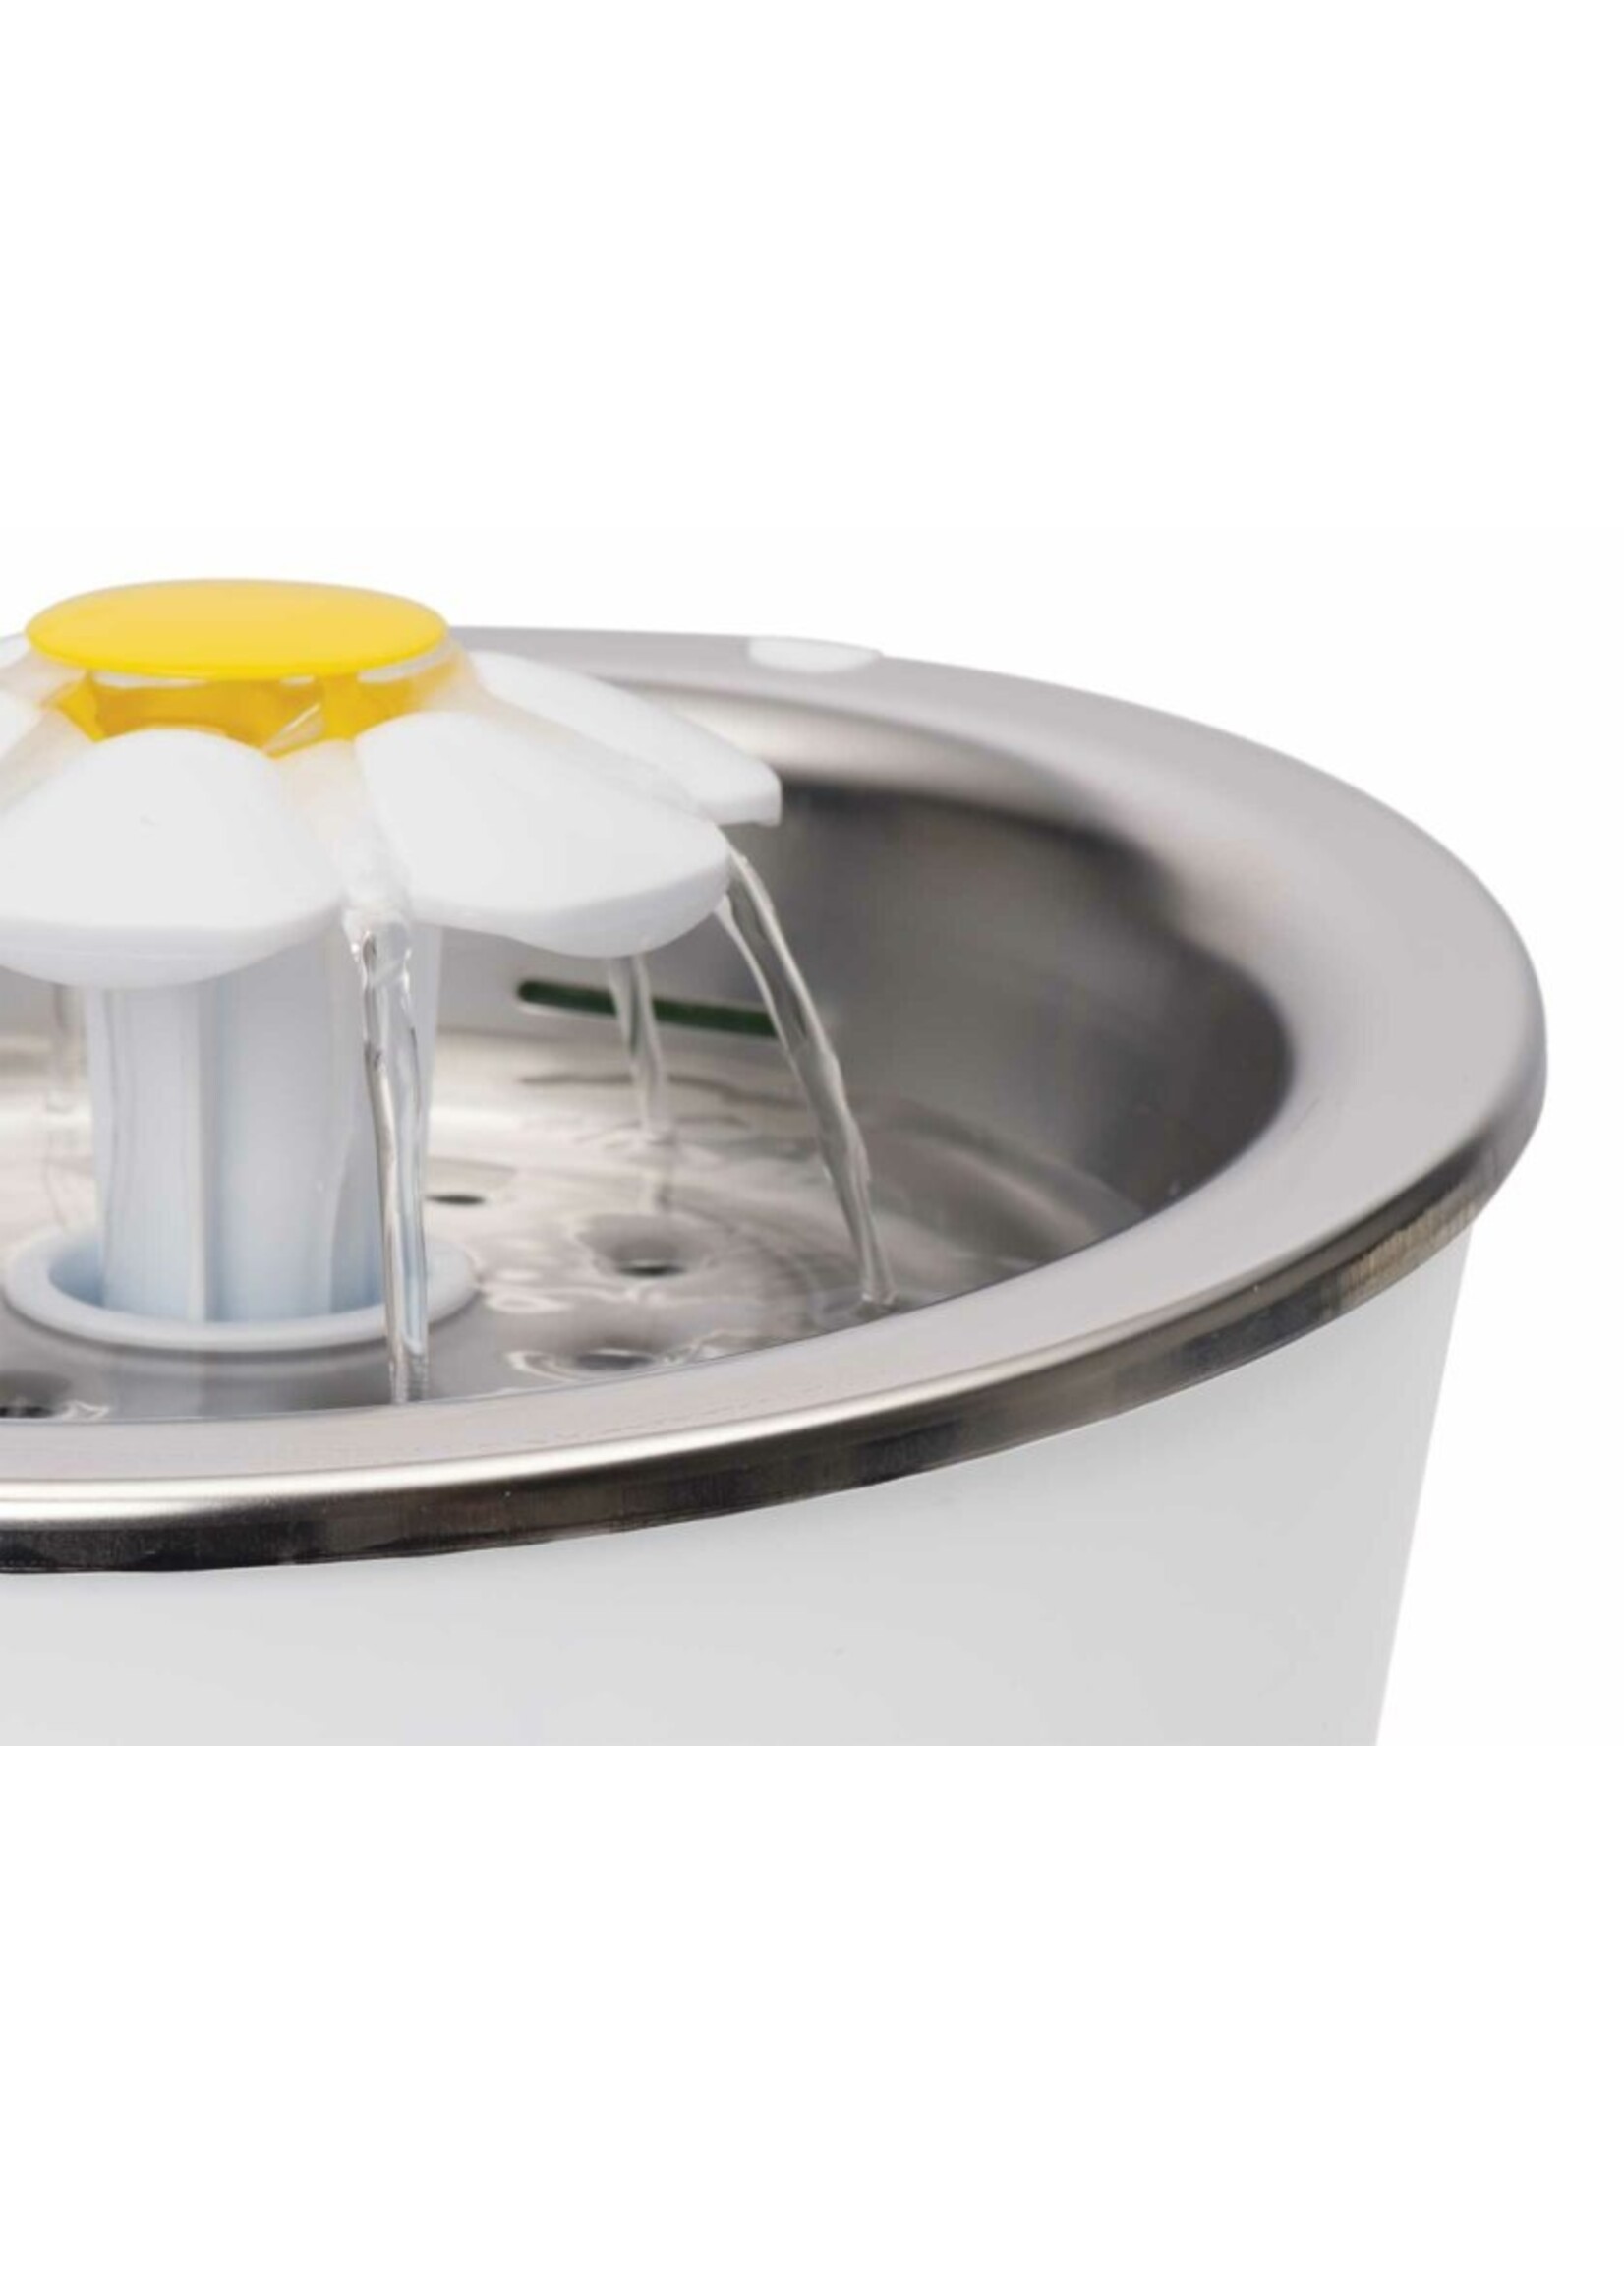 Catit Catit Flower Fountain Stainless Steel Top